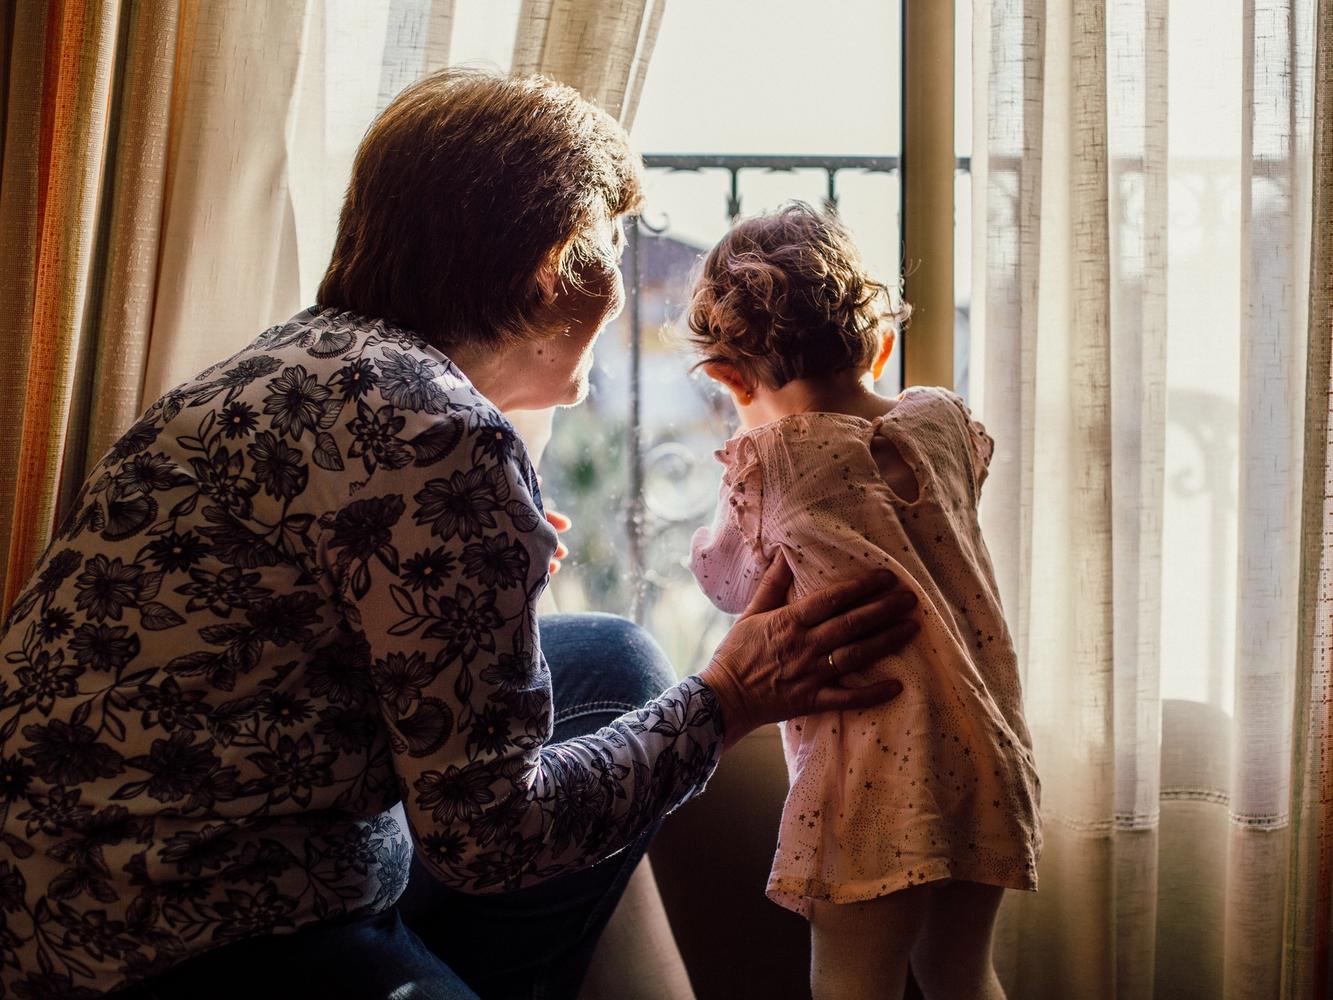 An older woman and a little girl looking out of a window